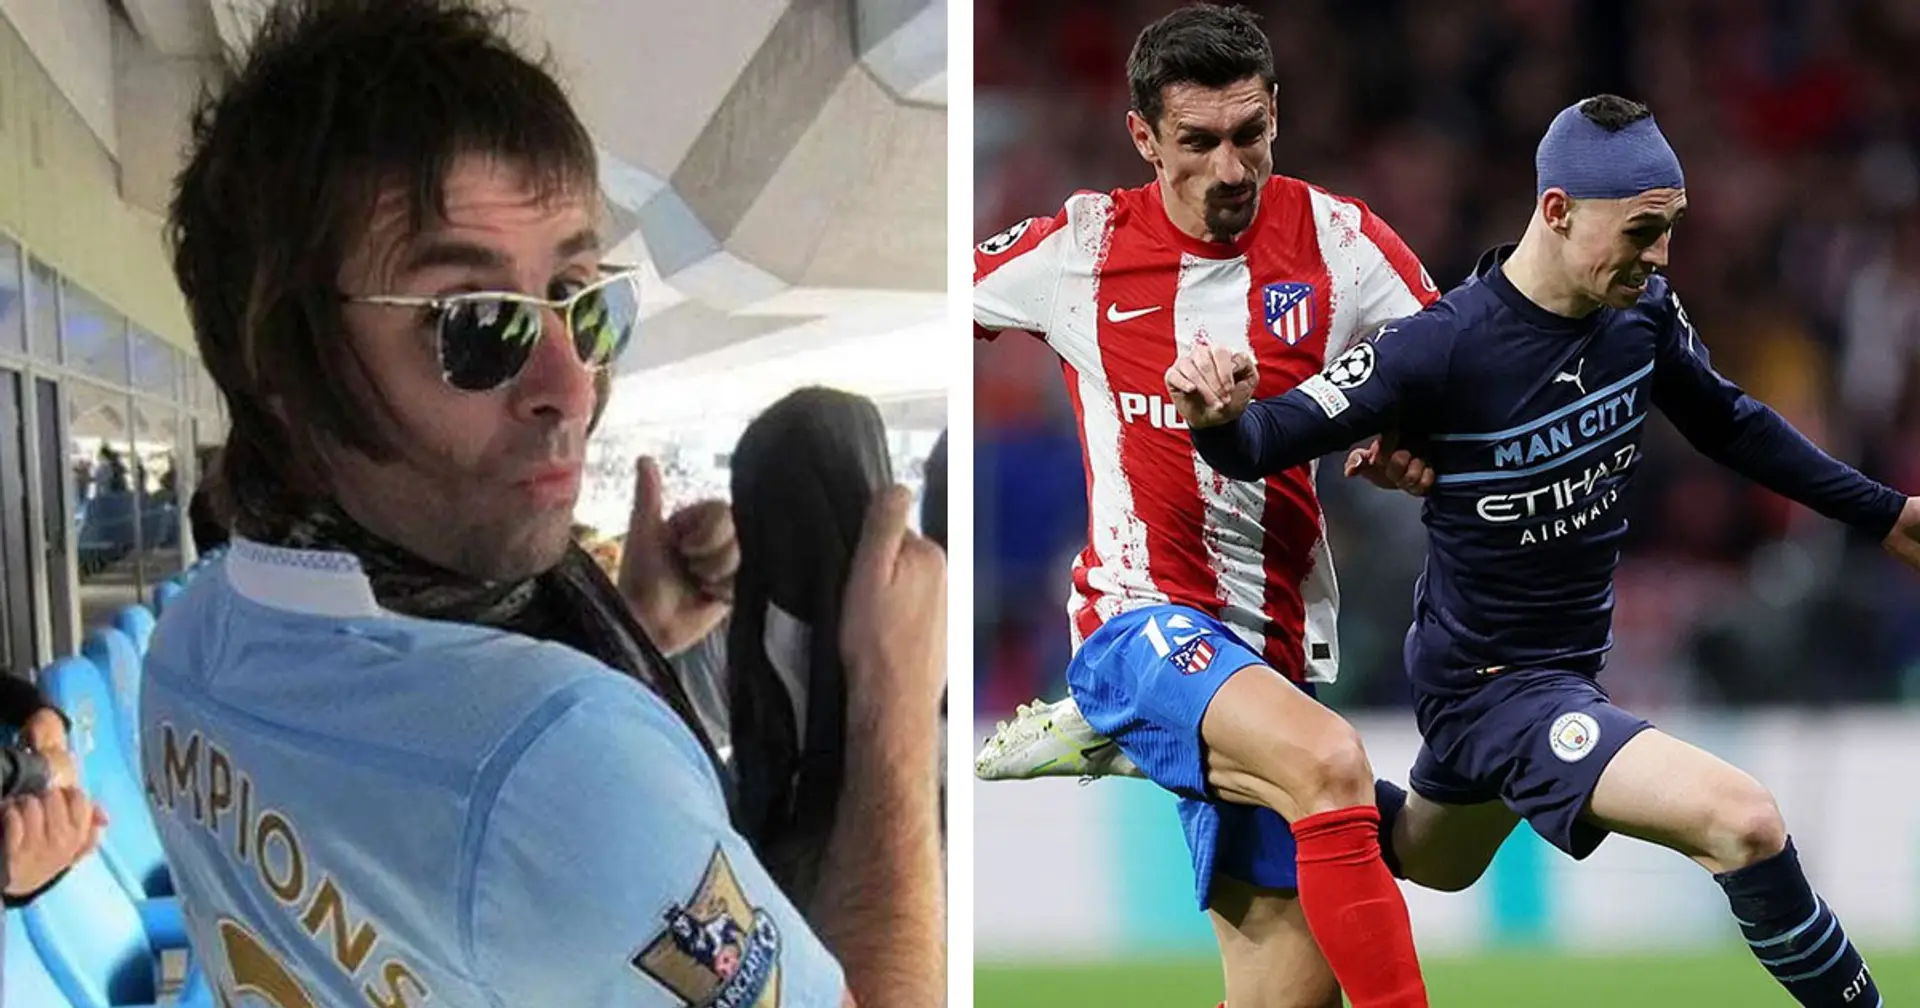 Man City superfan Liam Gallagher apologizes for threatening to kill Stefan Savic after Champions League clash